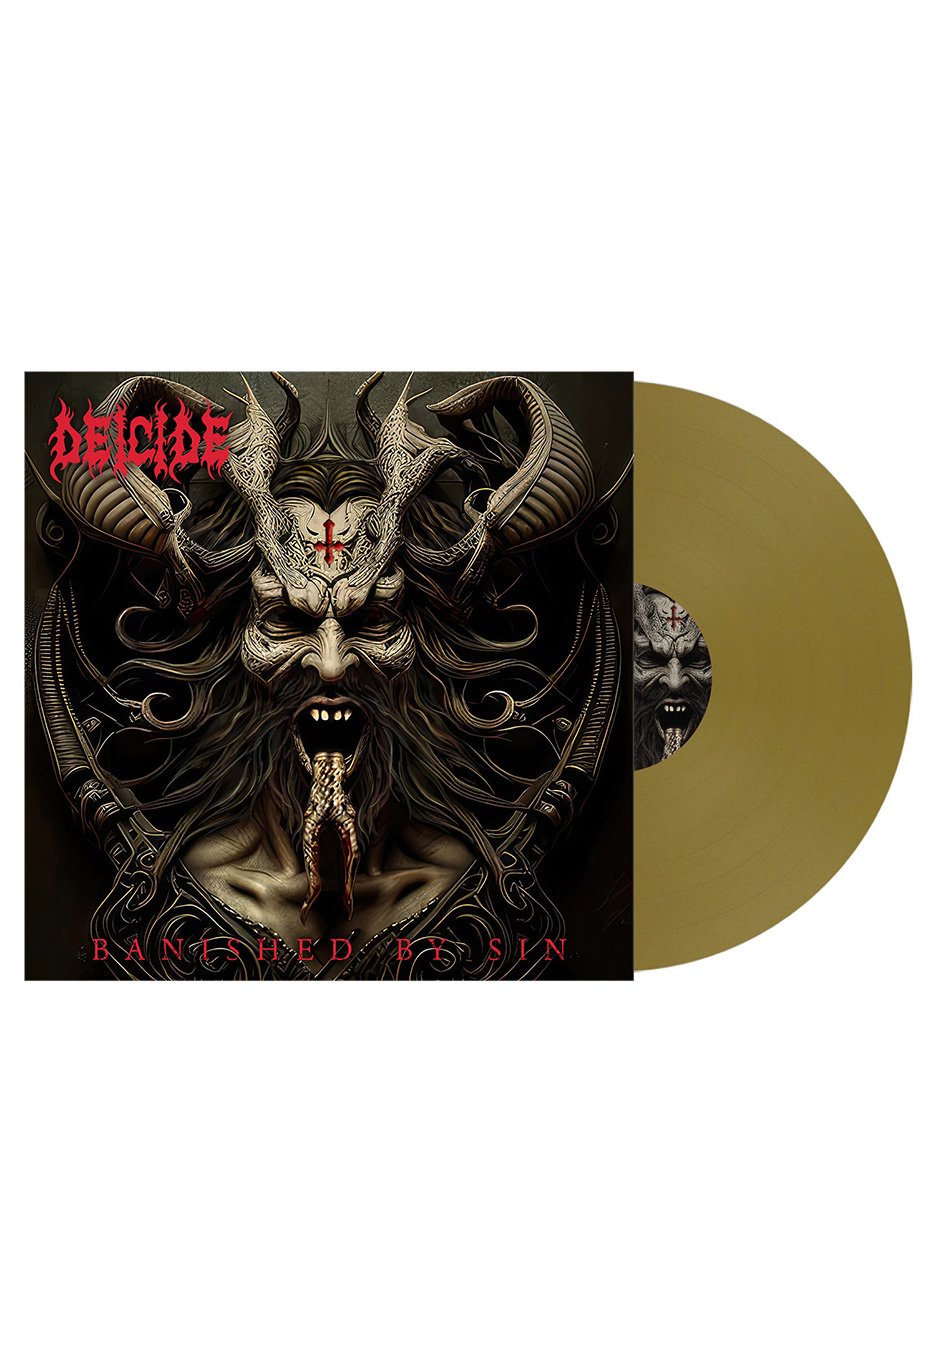 Deicide - Banished By Sin Ltd. Opaque Gold - Colored Vinyl